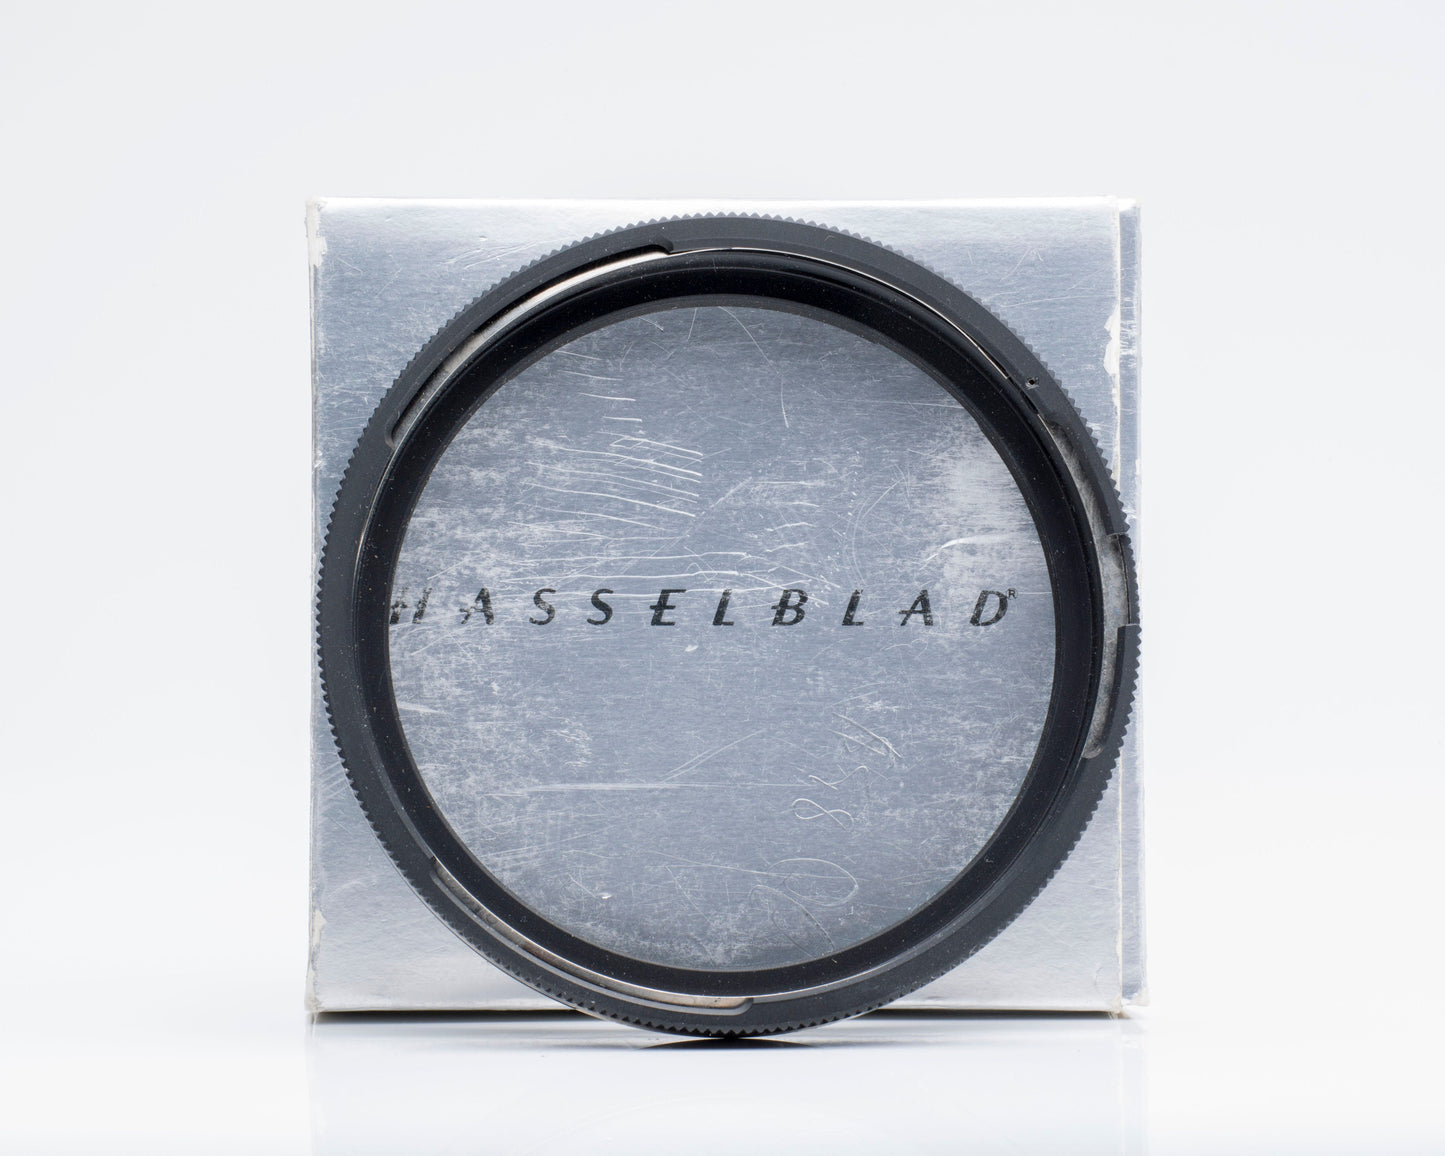 Hasselblad Bay 70 Lens Mounting Ring 40687